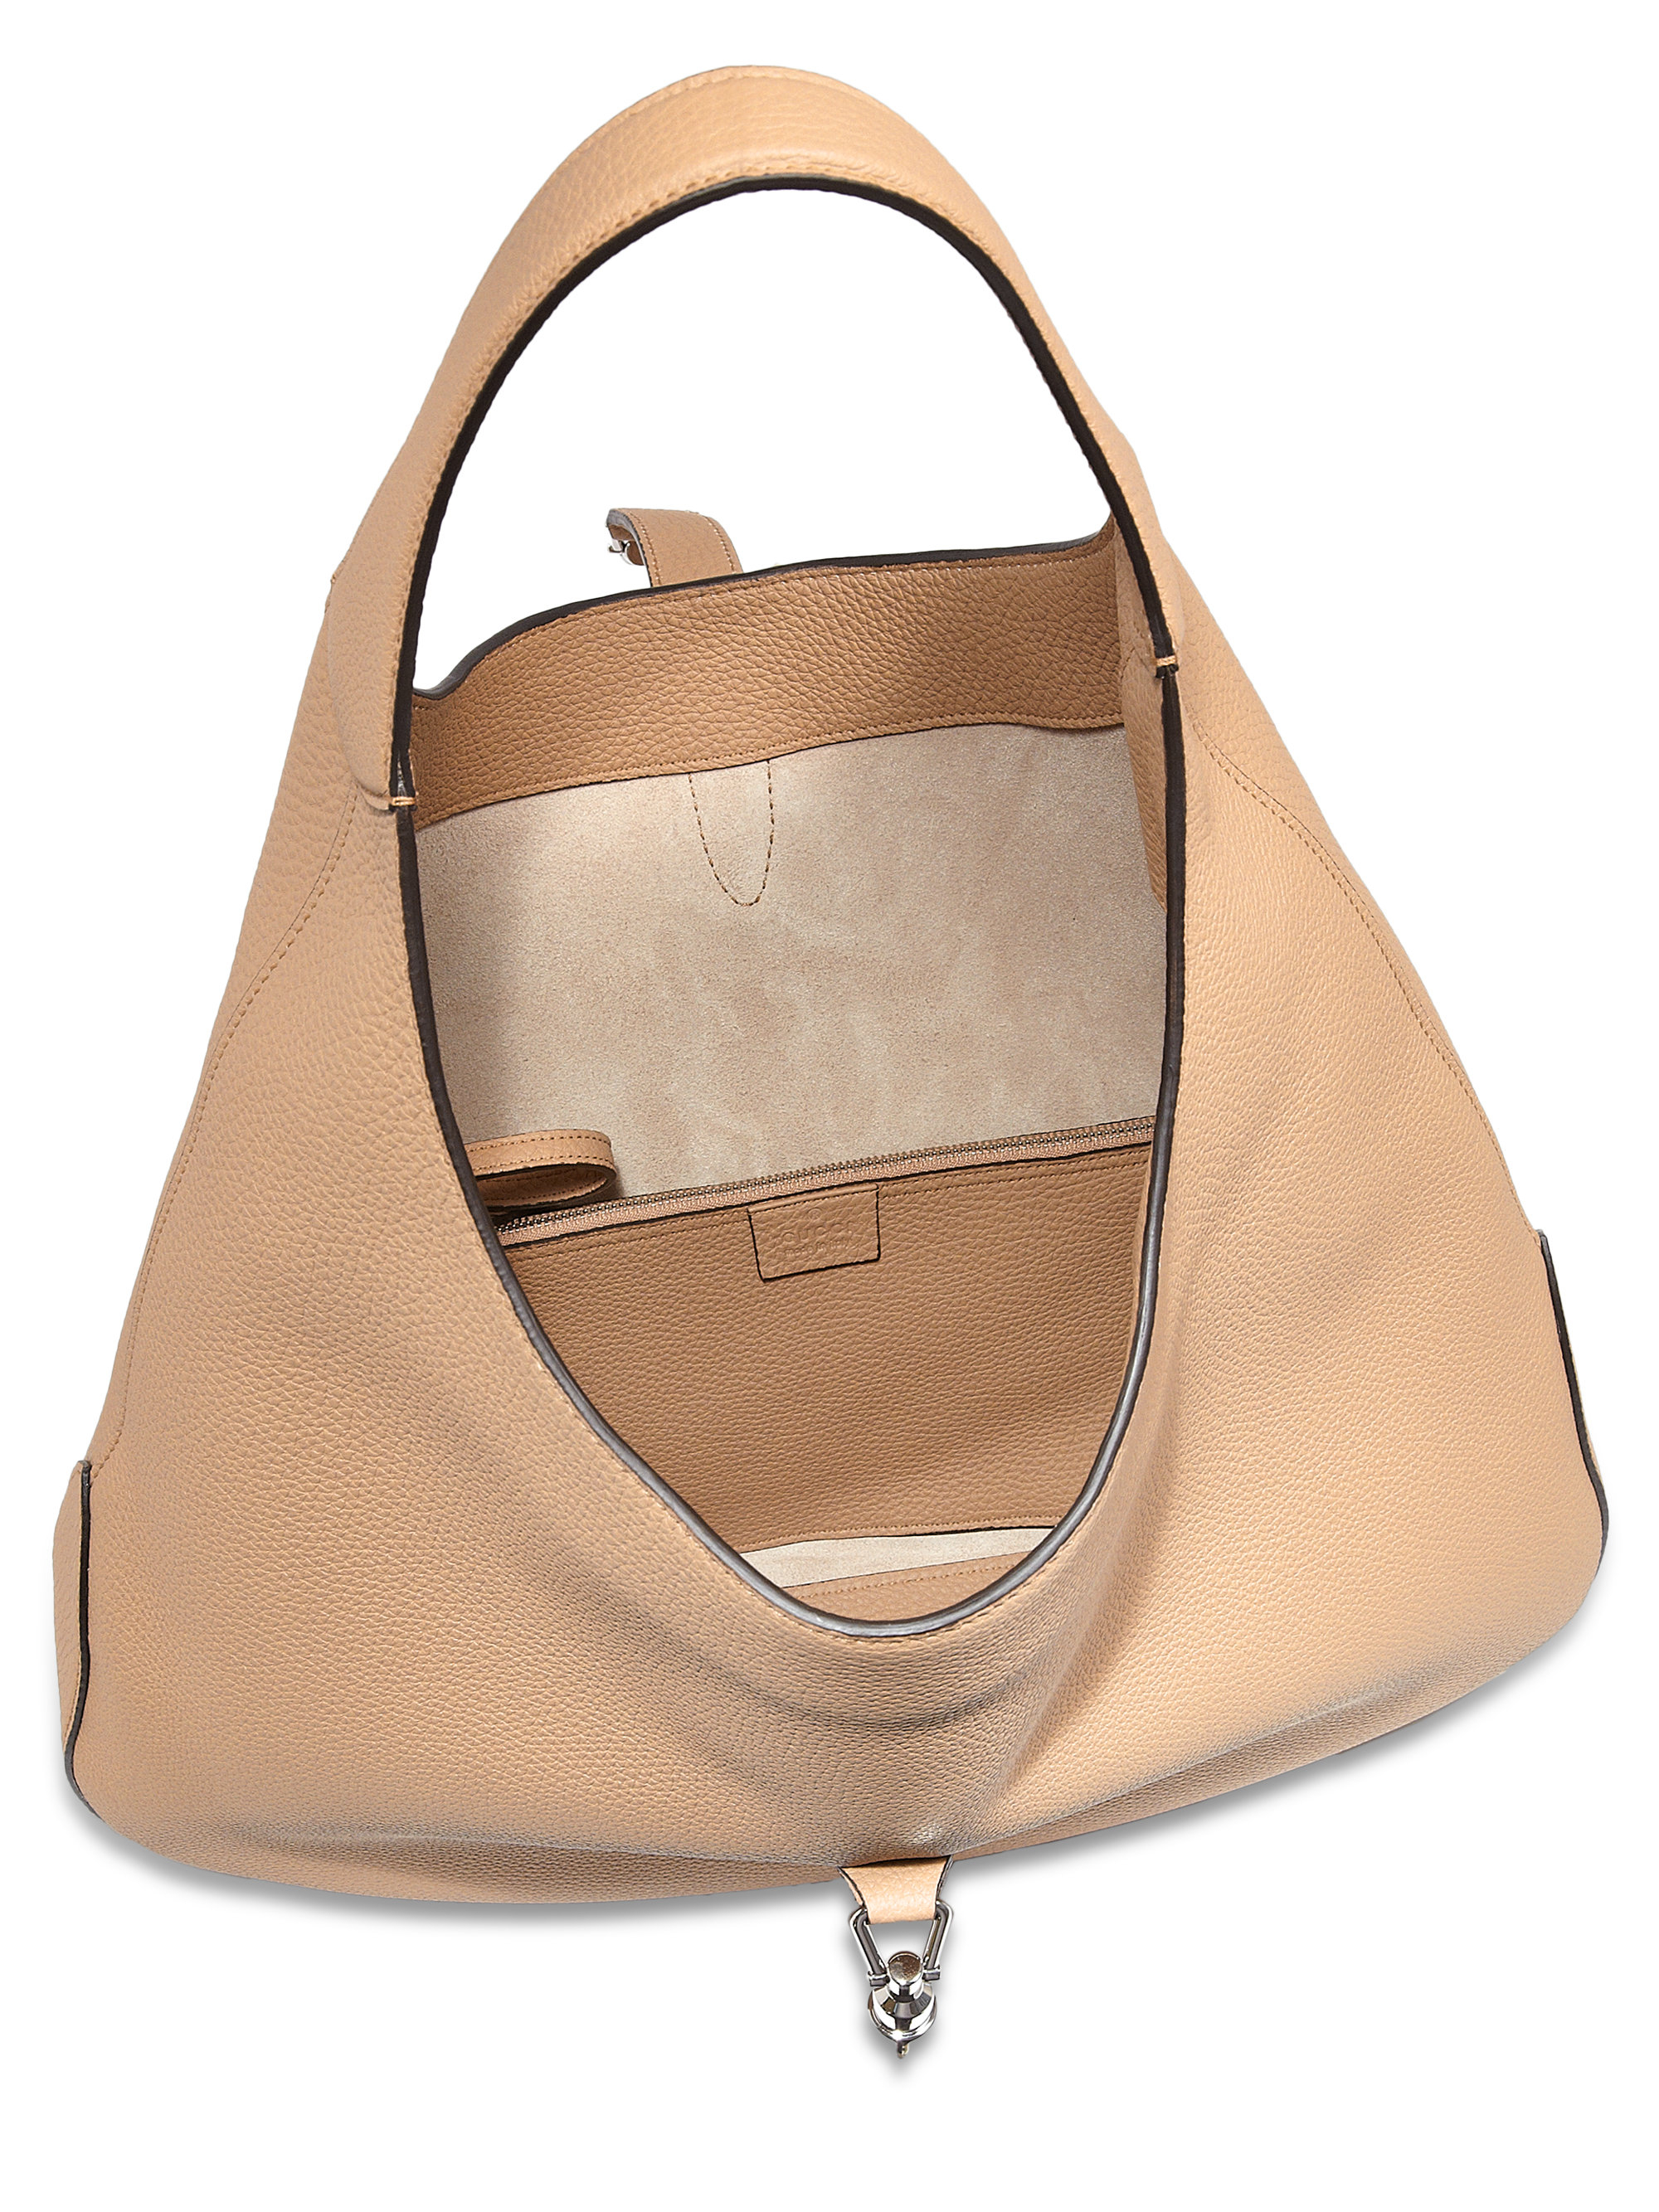 Gucci Jackie Soft Leather Hobo Bag in Brown (WINE) | Lyst